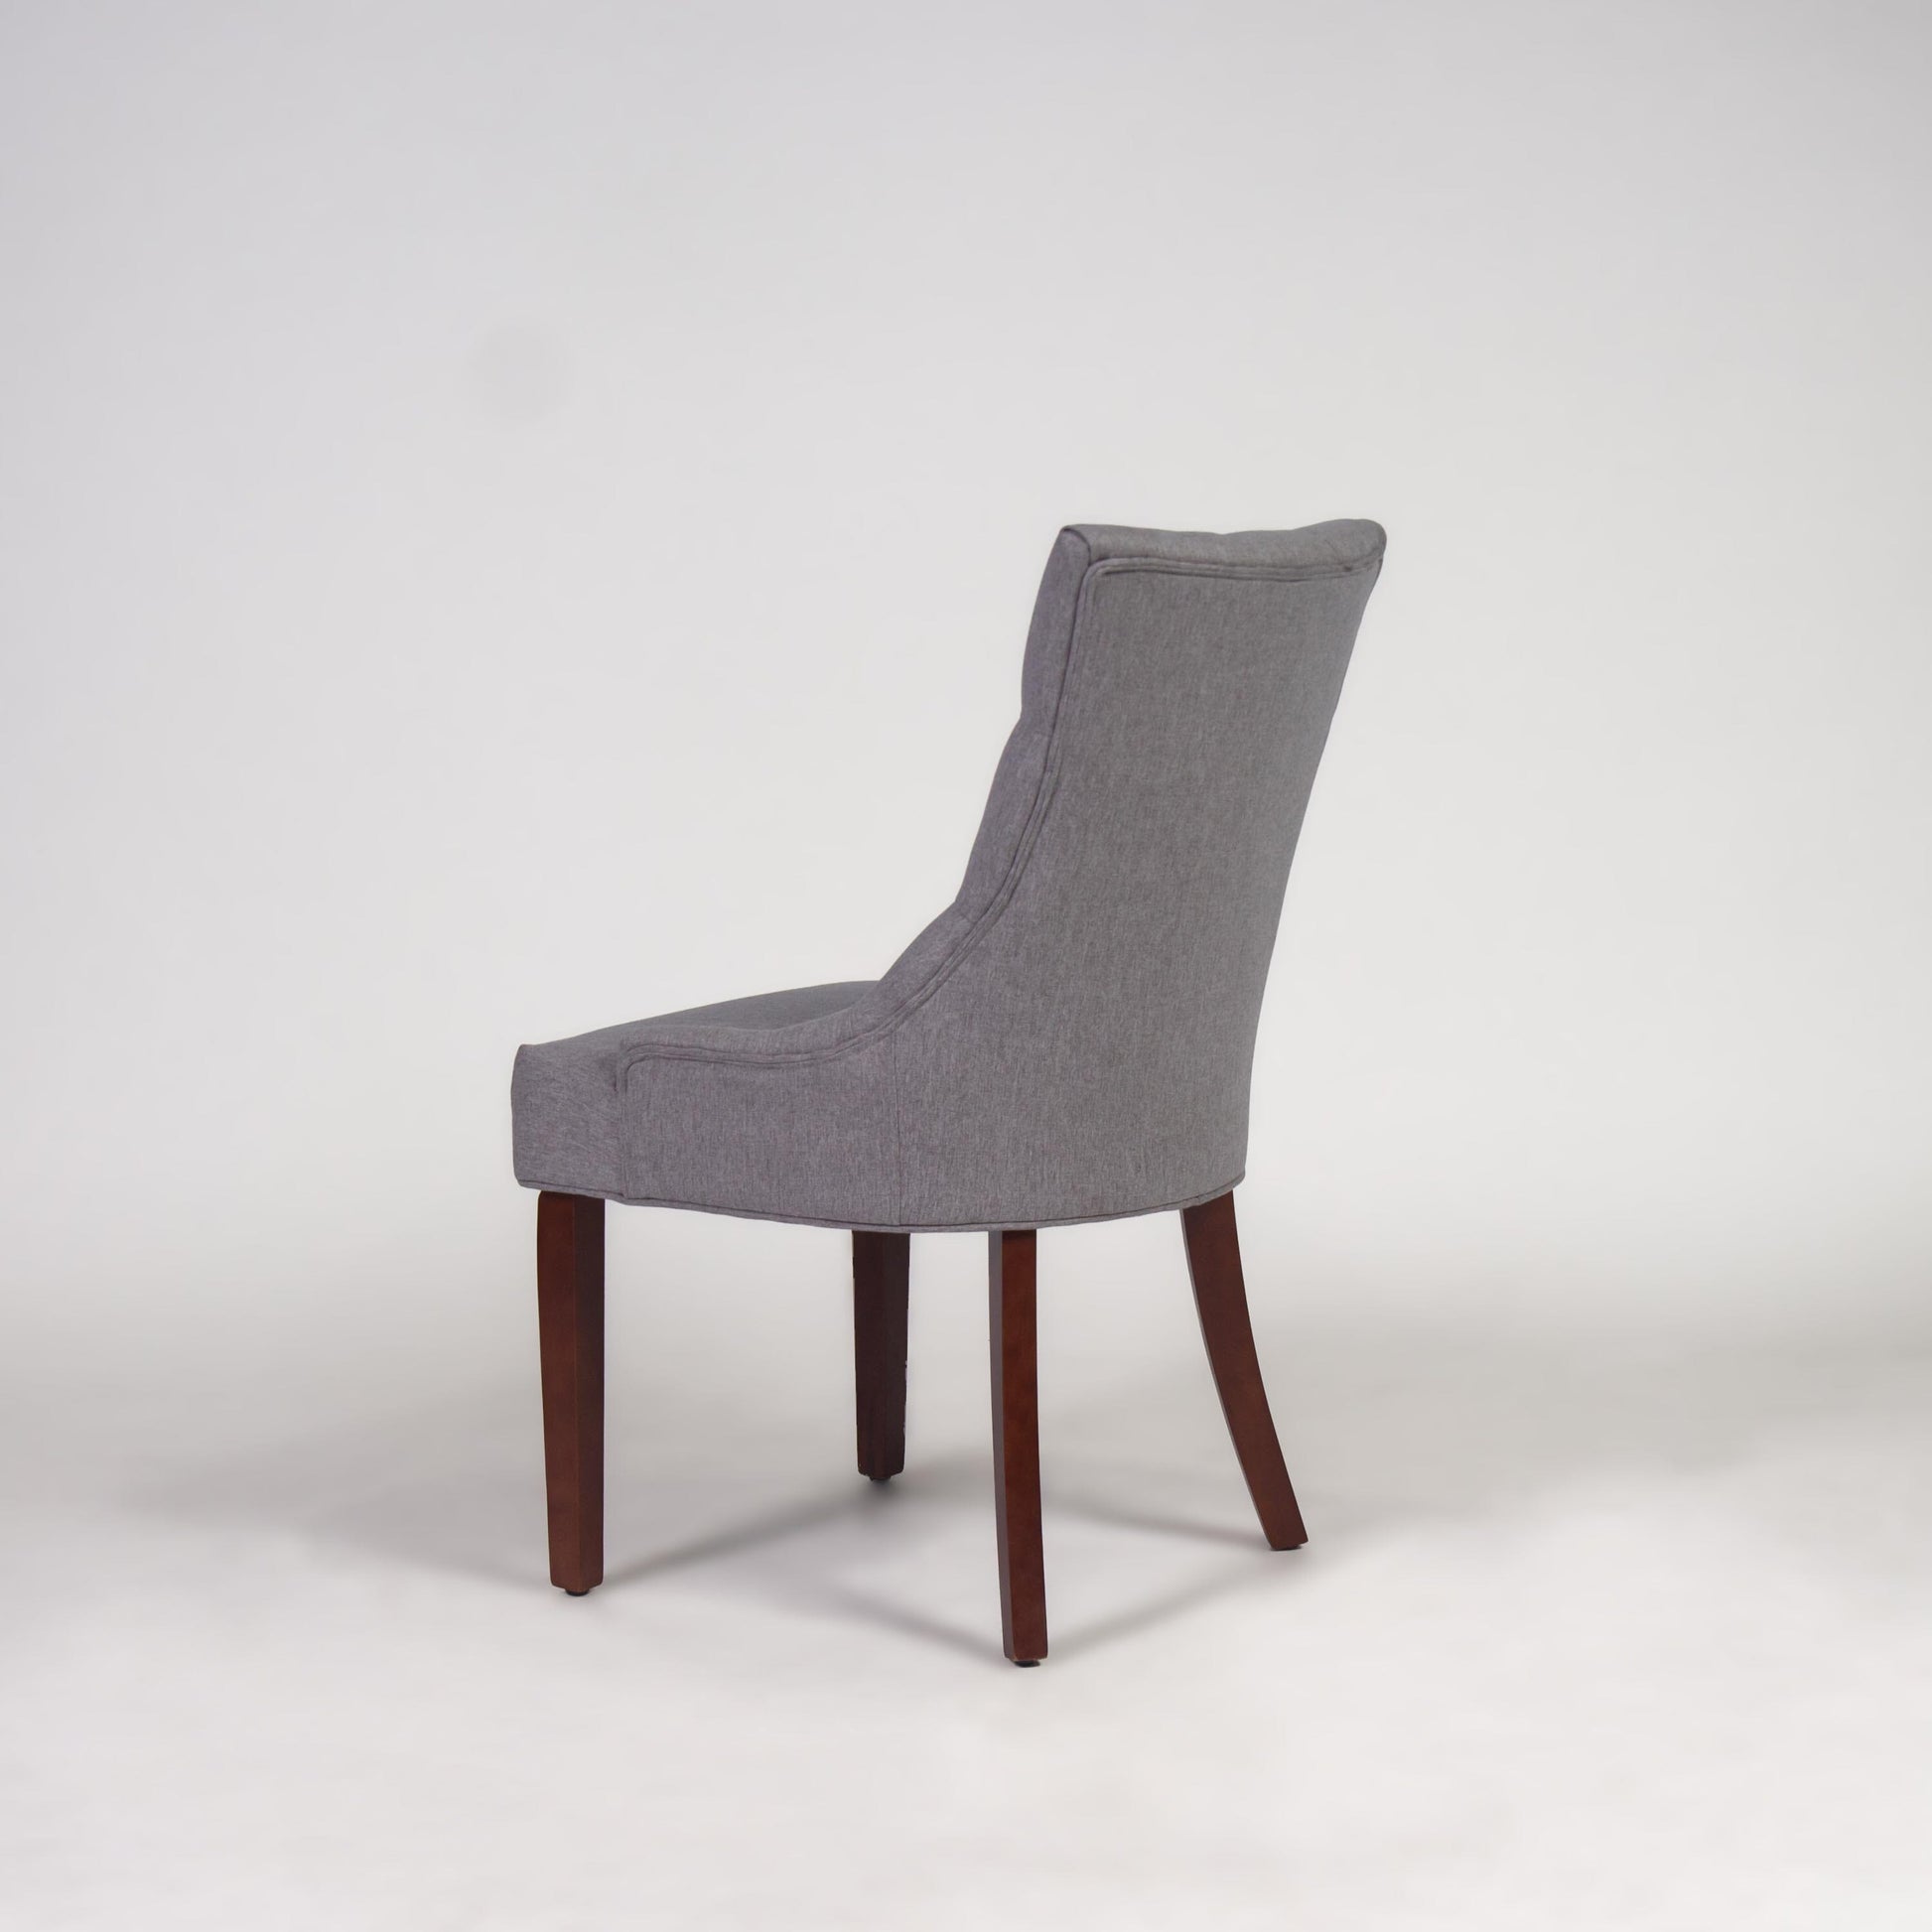 Louis dining chairs - set of 2 - grey and dark wood - Laura James